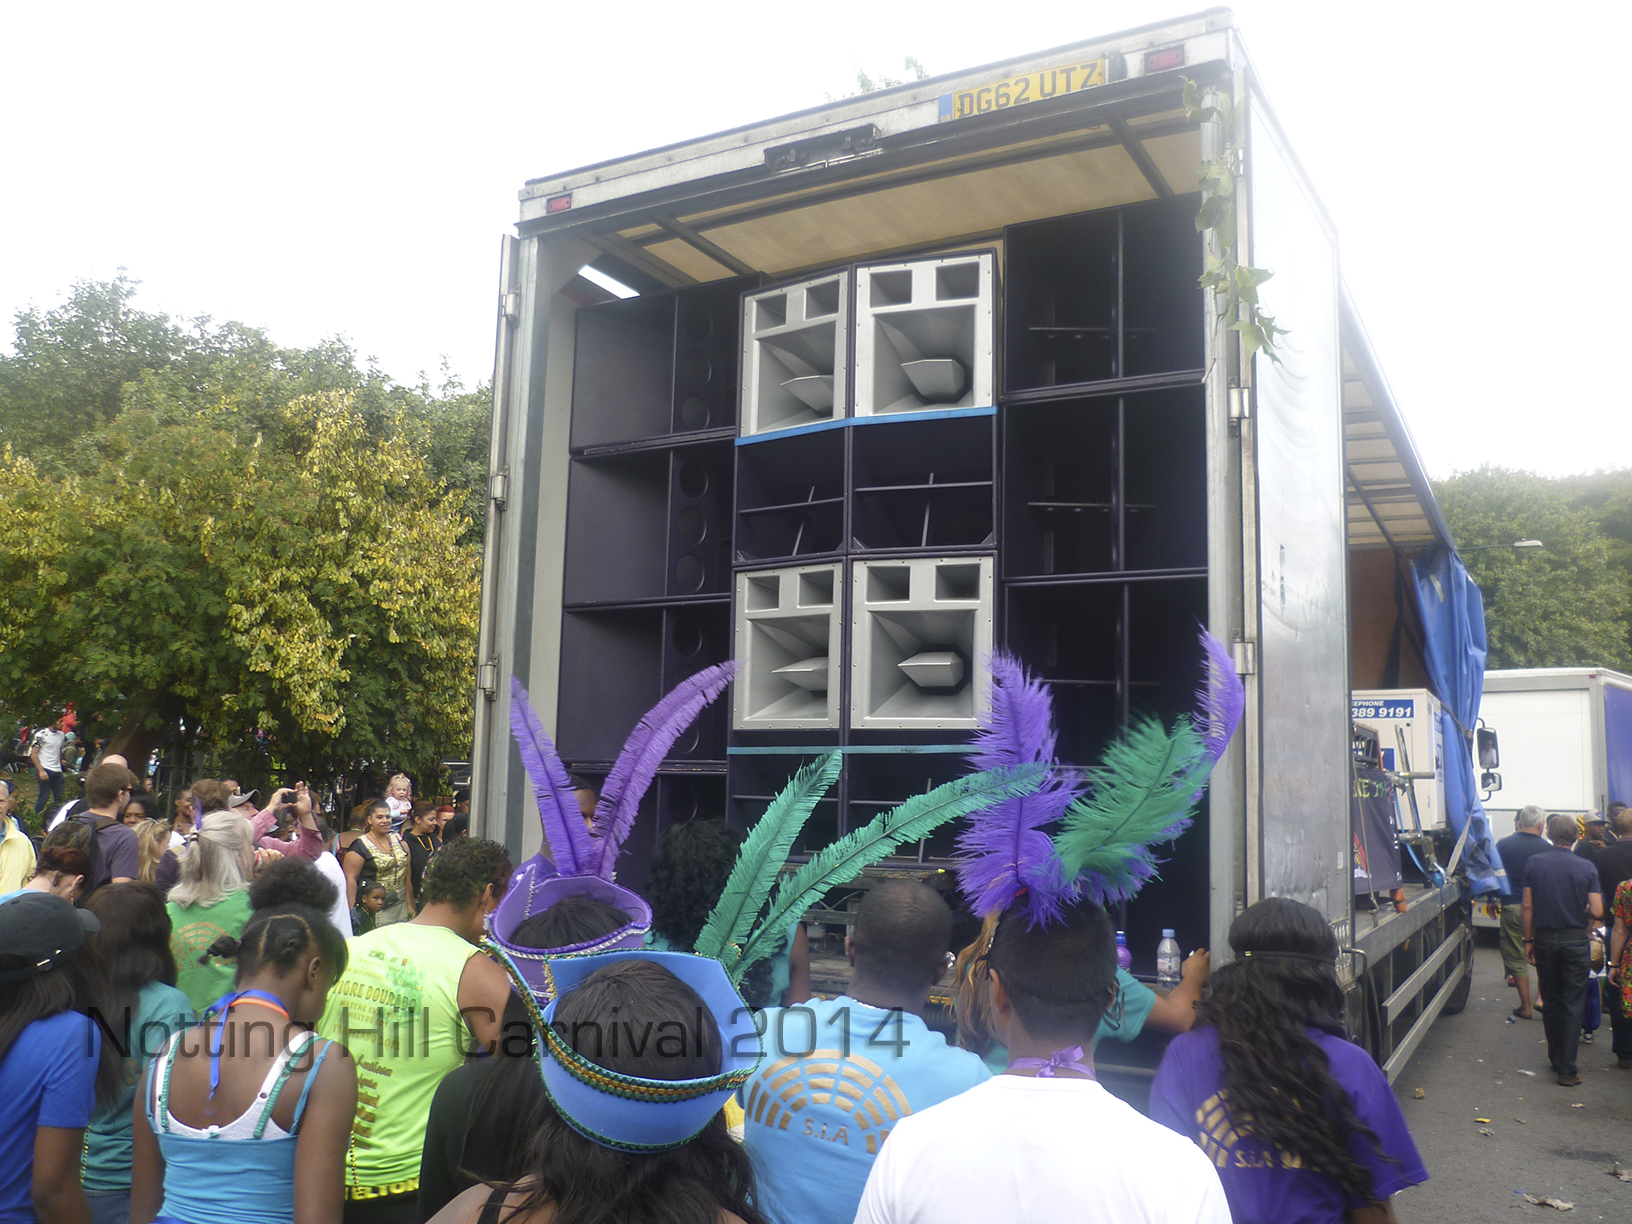 Notting-Hill-Carnival-2014-Float-Funktion-One-Sound-System-11